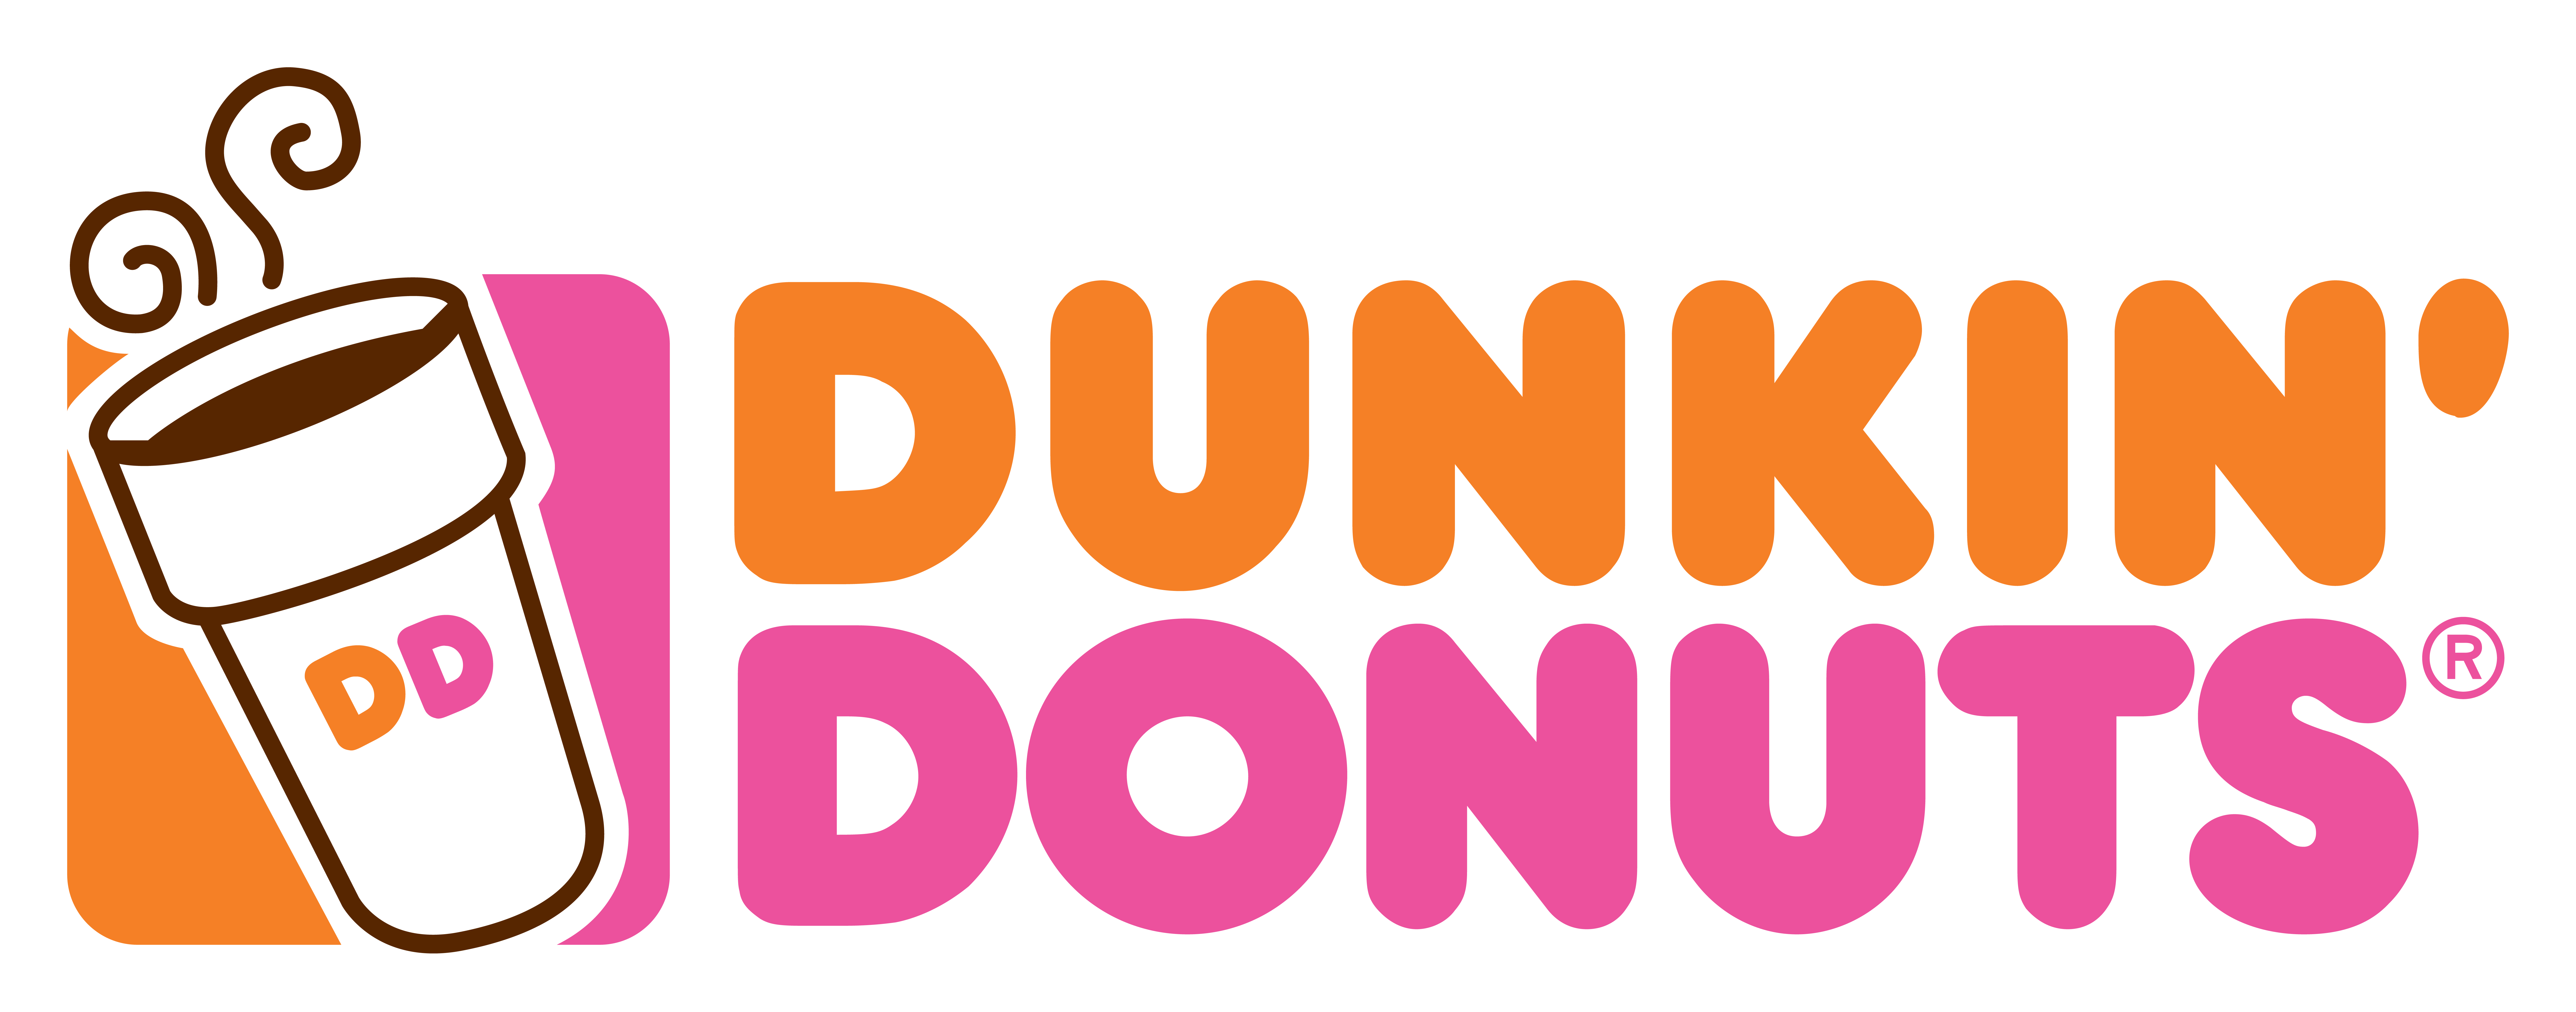 2962 Dunkin Donuts Images Stock Photos  Vectors  Shutterstock